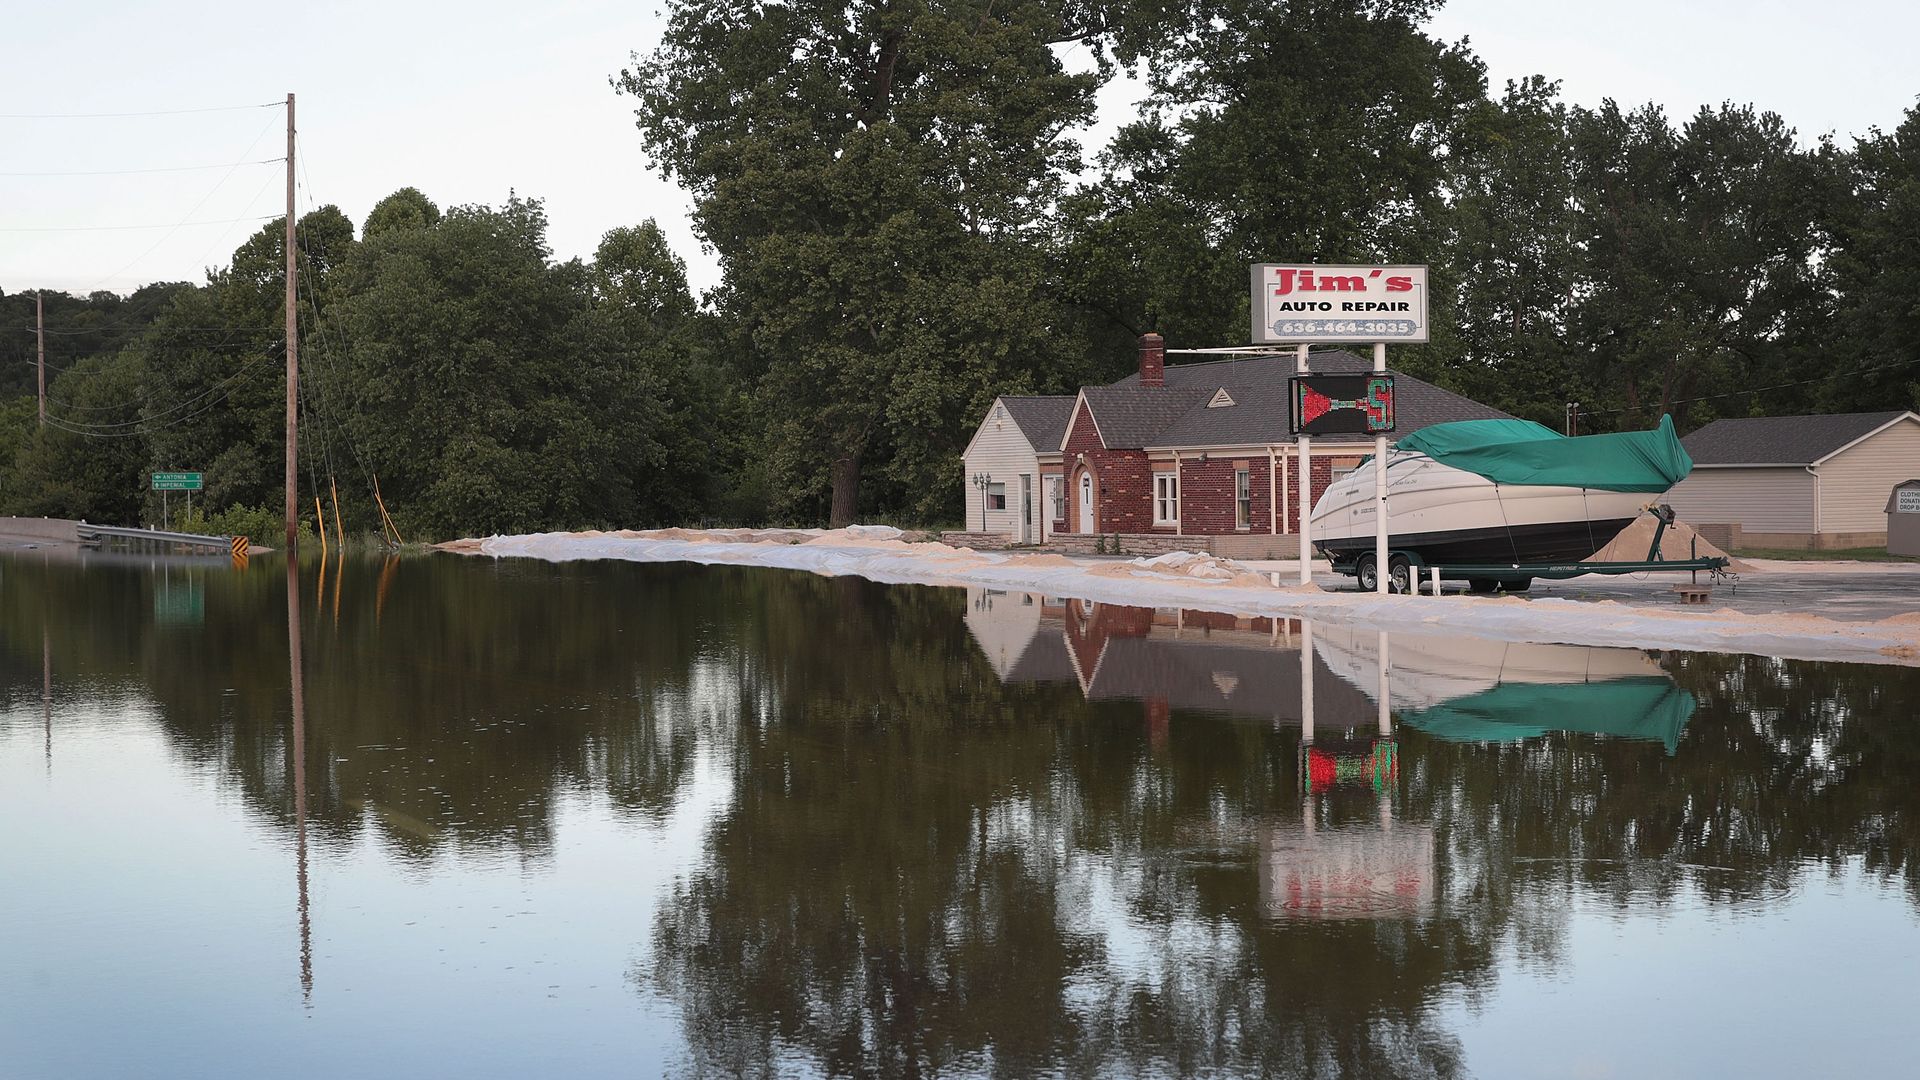 This image shows a small shop surrounded by floodwater.